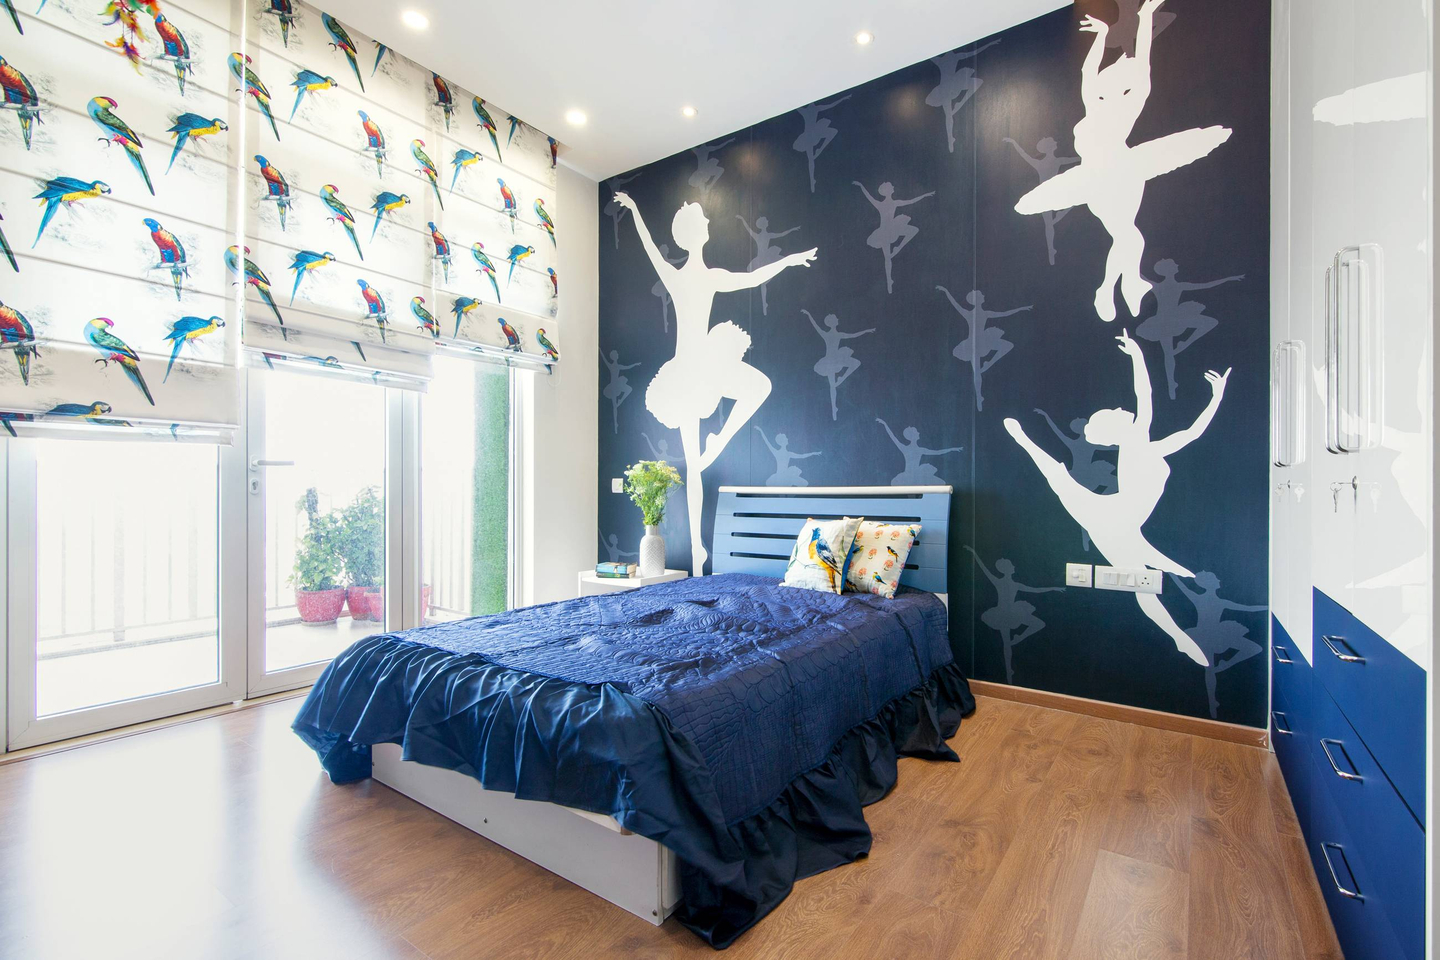 Kids' Room With Dark Blue And White Wallpaper And Bedding - Livspace